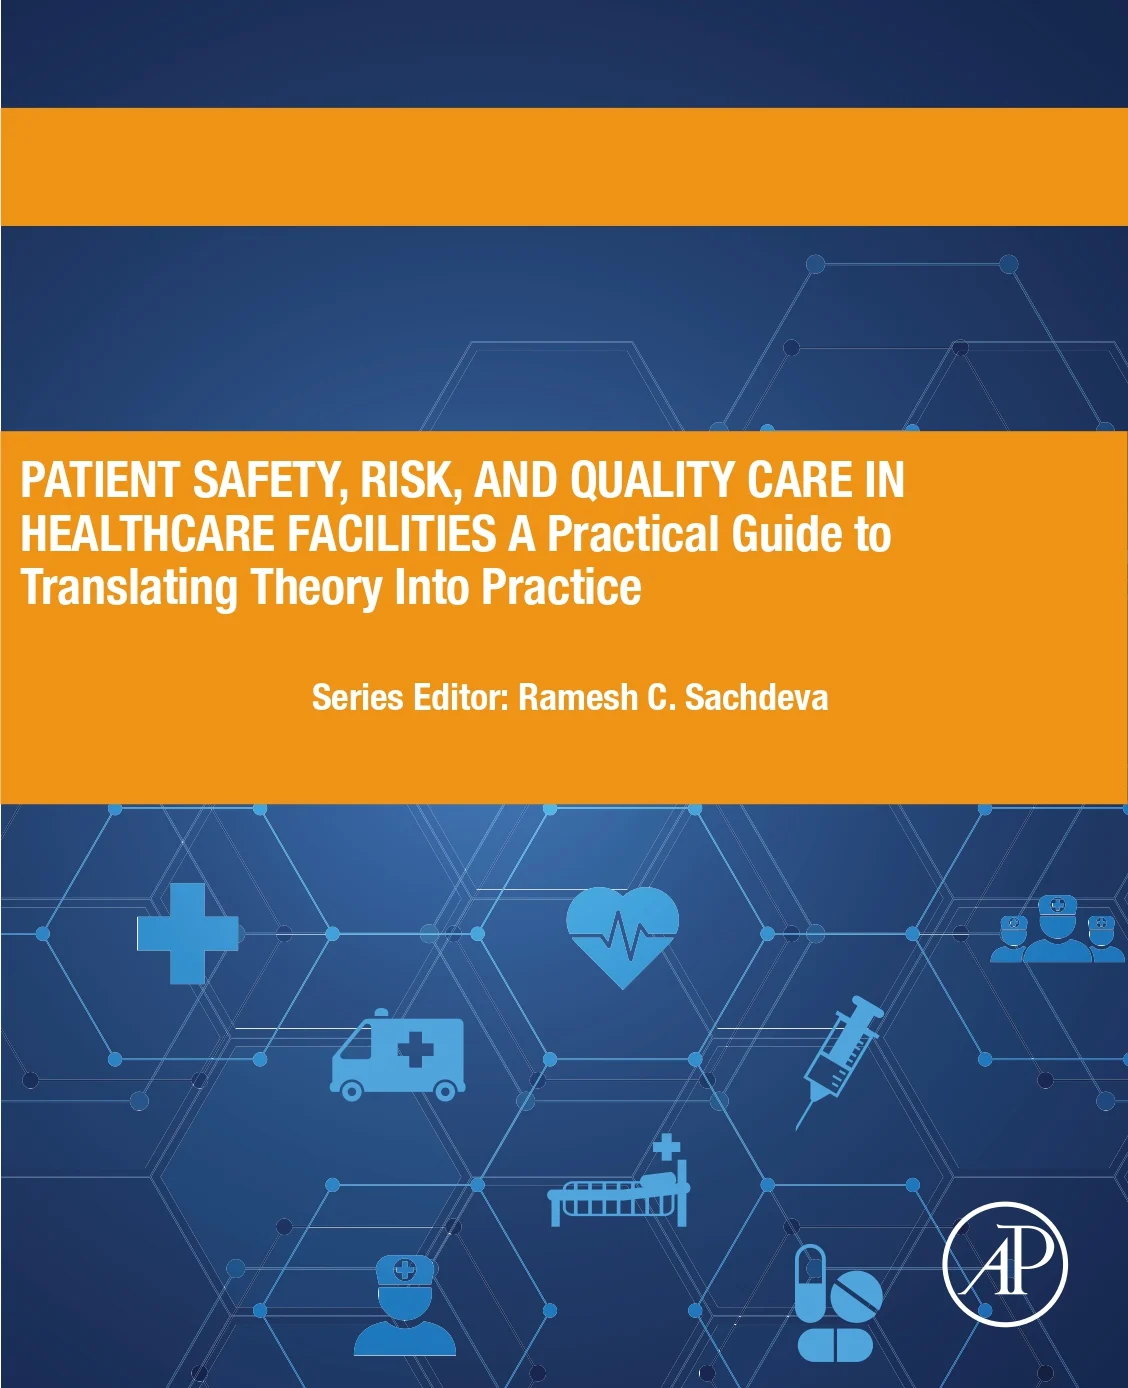 de to translating theory into practice Patient Safety, Risk and Quality Care in Healthcare Facilities: A practical guide to translating theory into practice